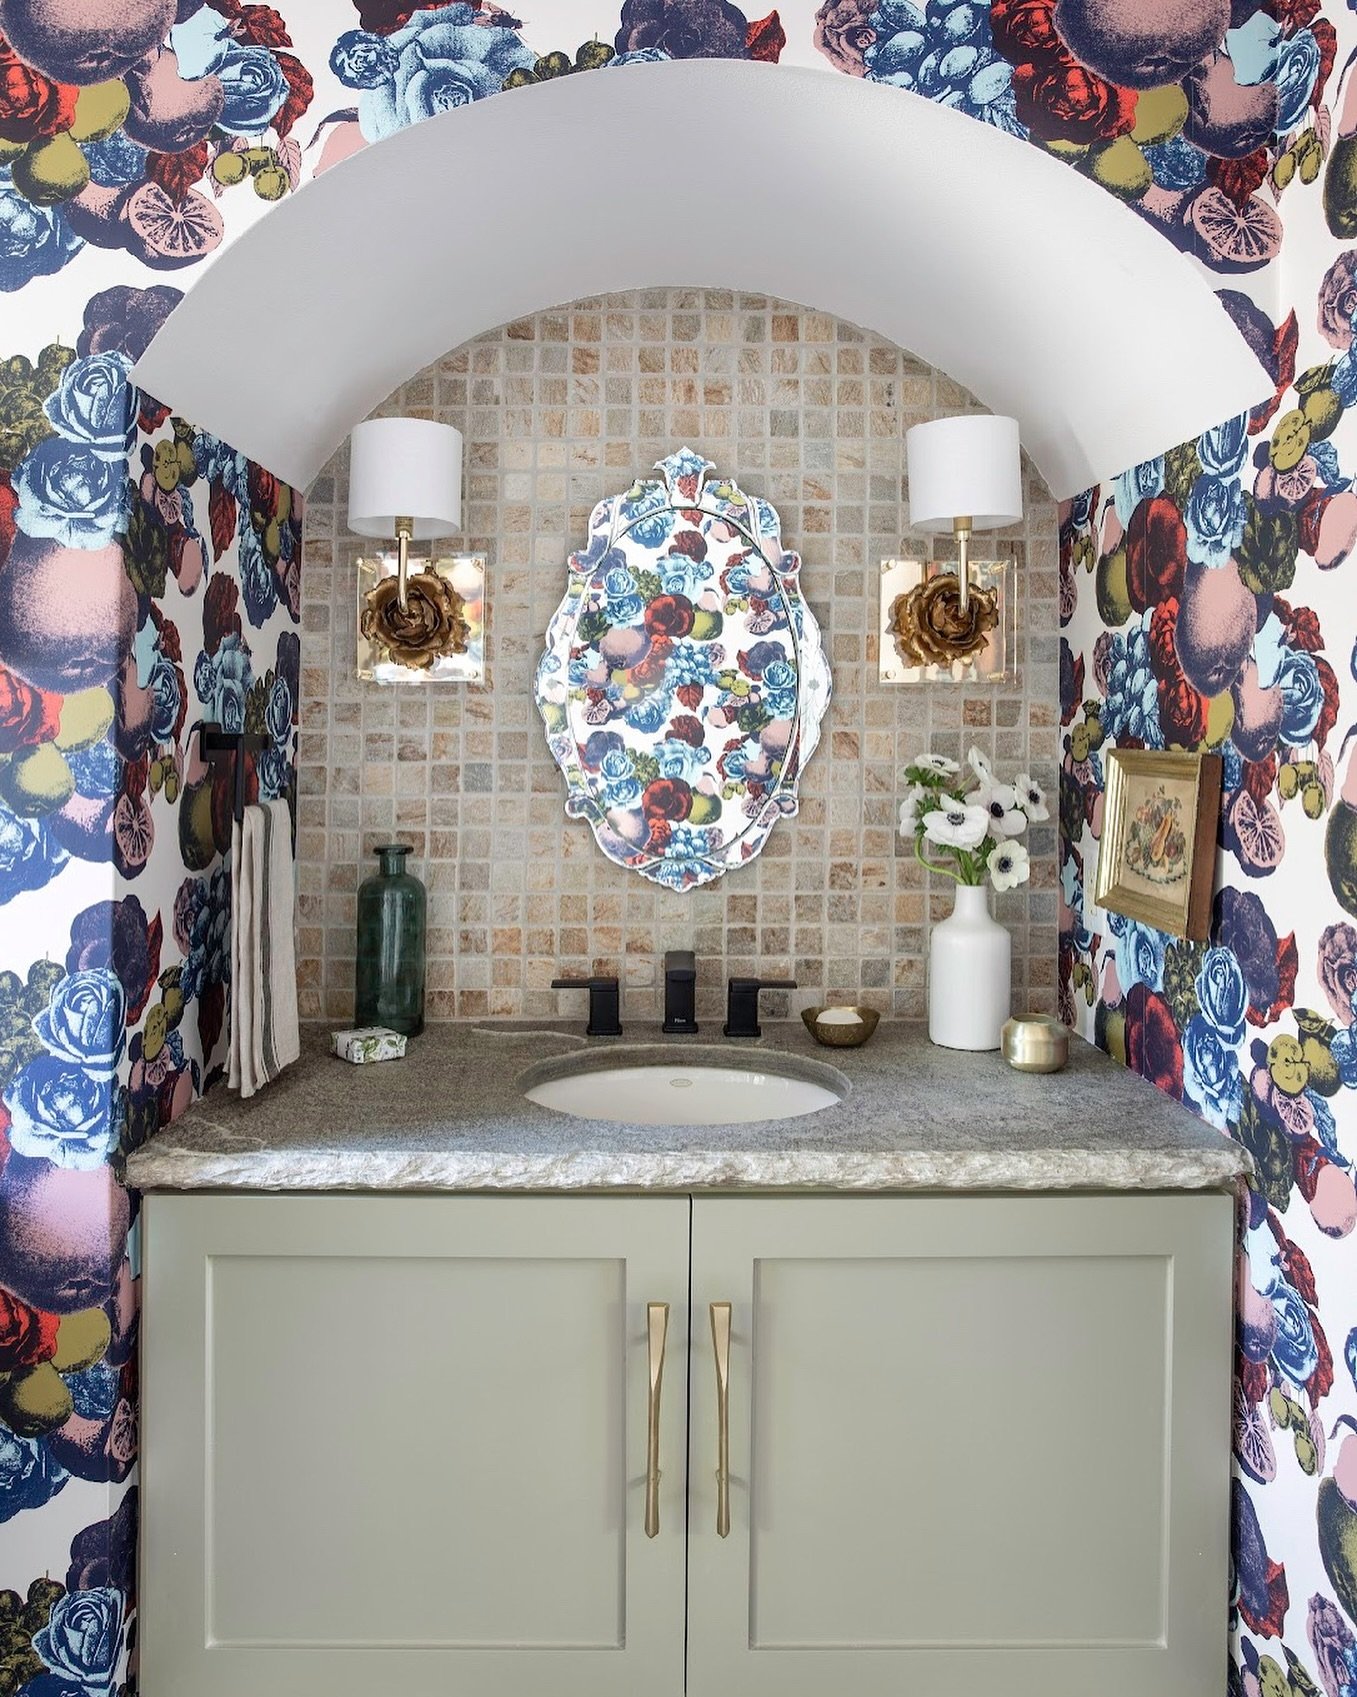 A treat for the eyes!&nbsp; We love when a client lets us run with our fun ideas.&nbsp;A favorite powder bathroom adorned in this beautiful @scandinavian_wallpaper wallcovering.

🌈Design by @emilyjunedesigns
📷Photography by @kerrykirkphoto

#banish